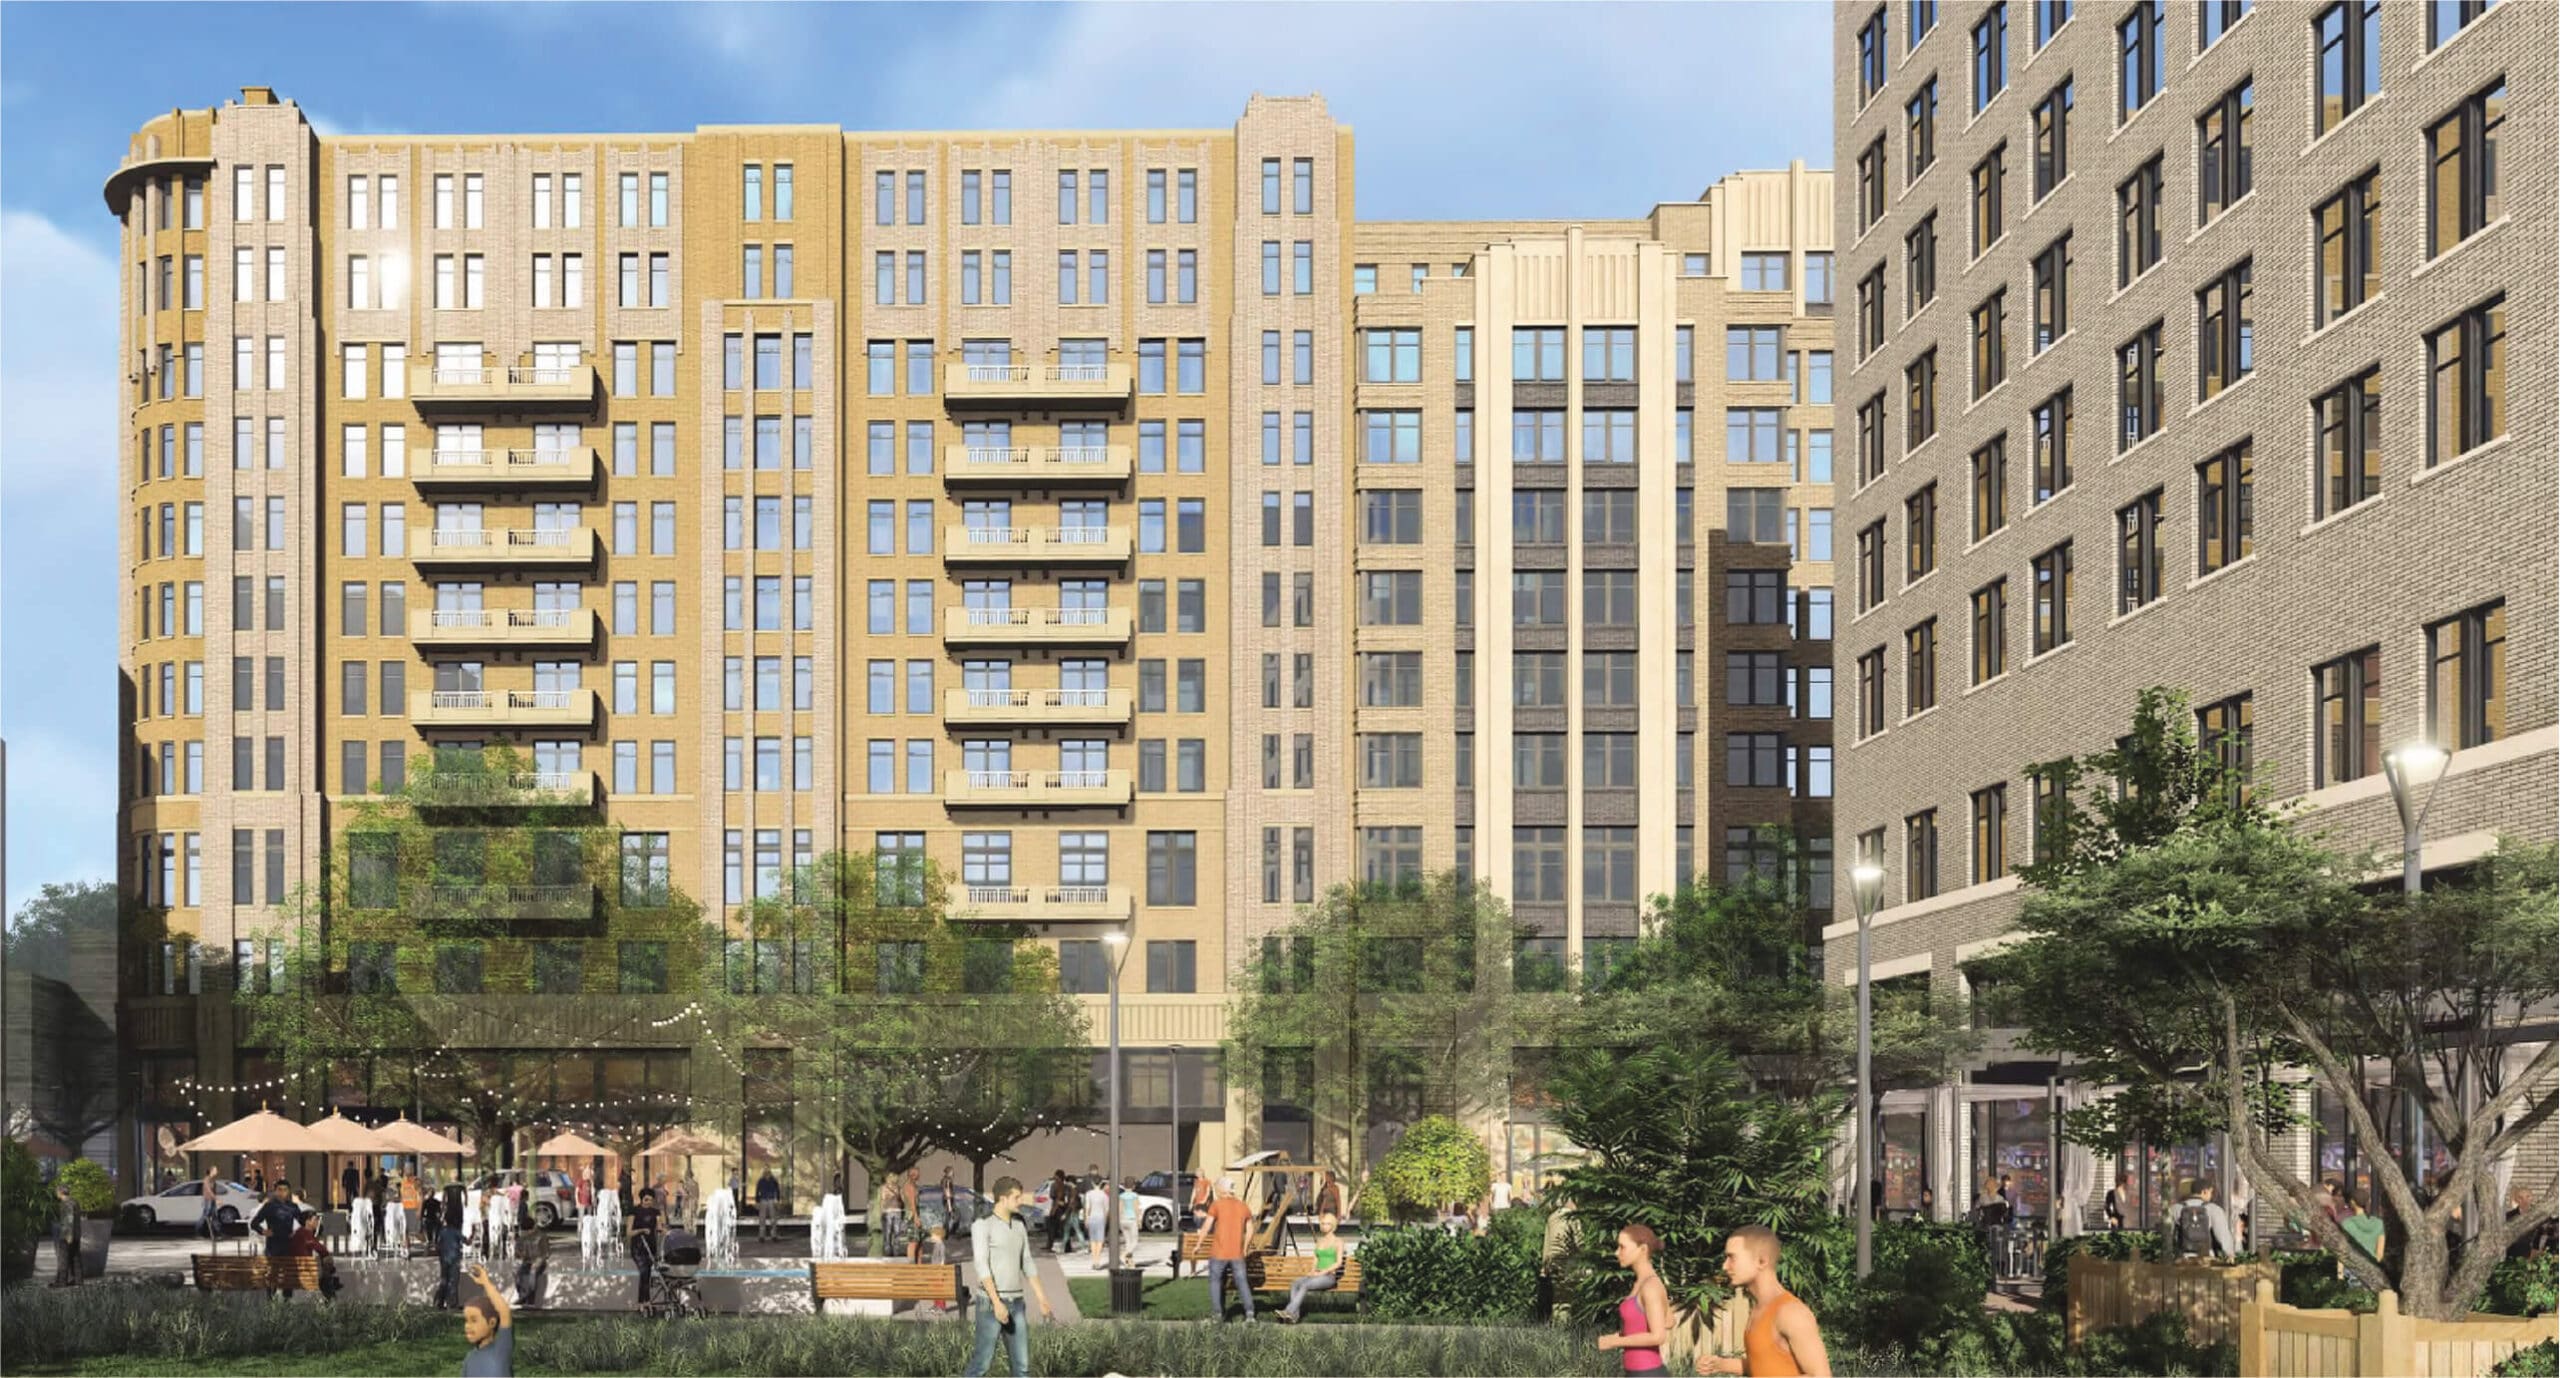 Twinbrook Quarter Developers Pitch Project Expected To Bring Wegmans to Rockville